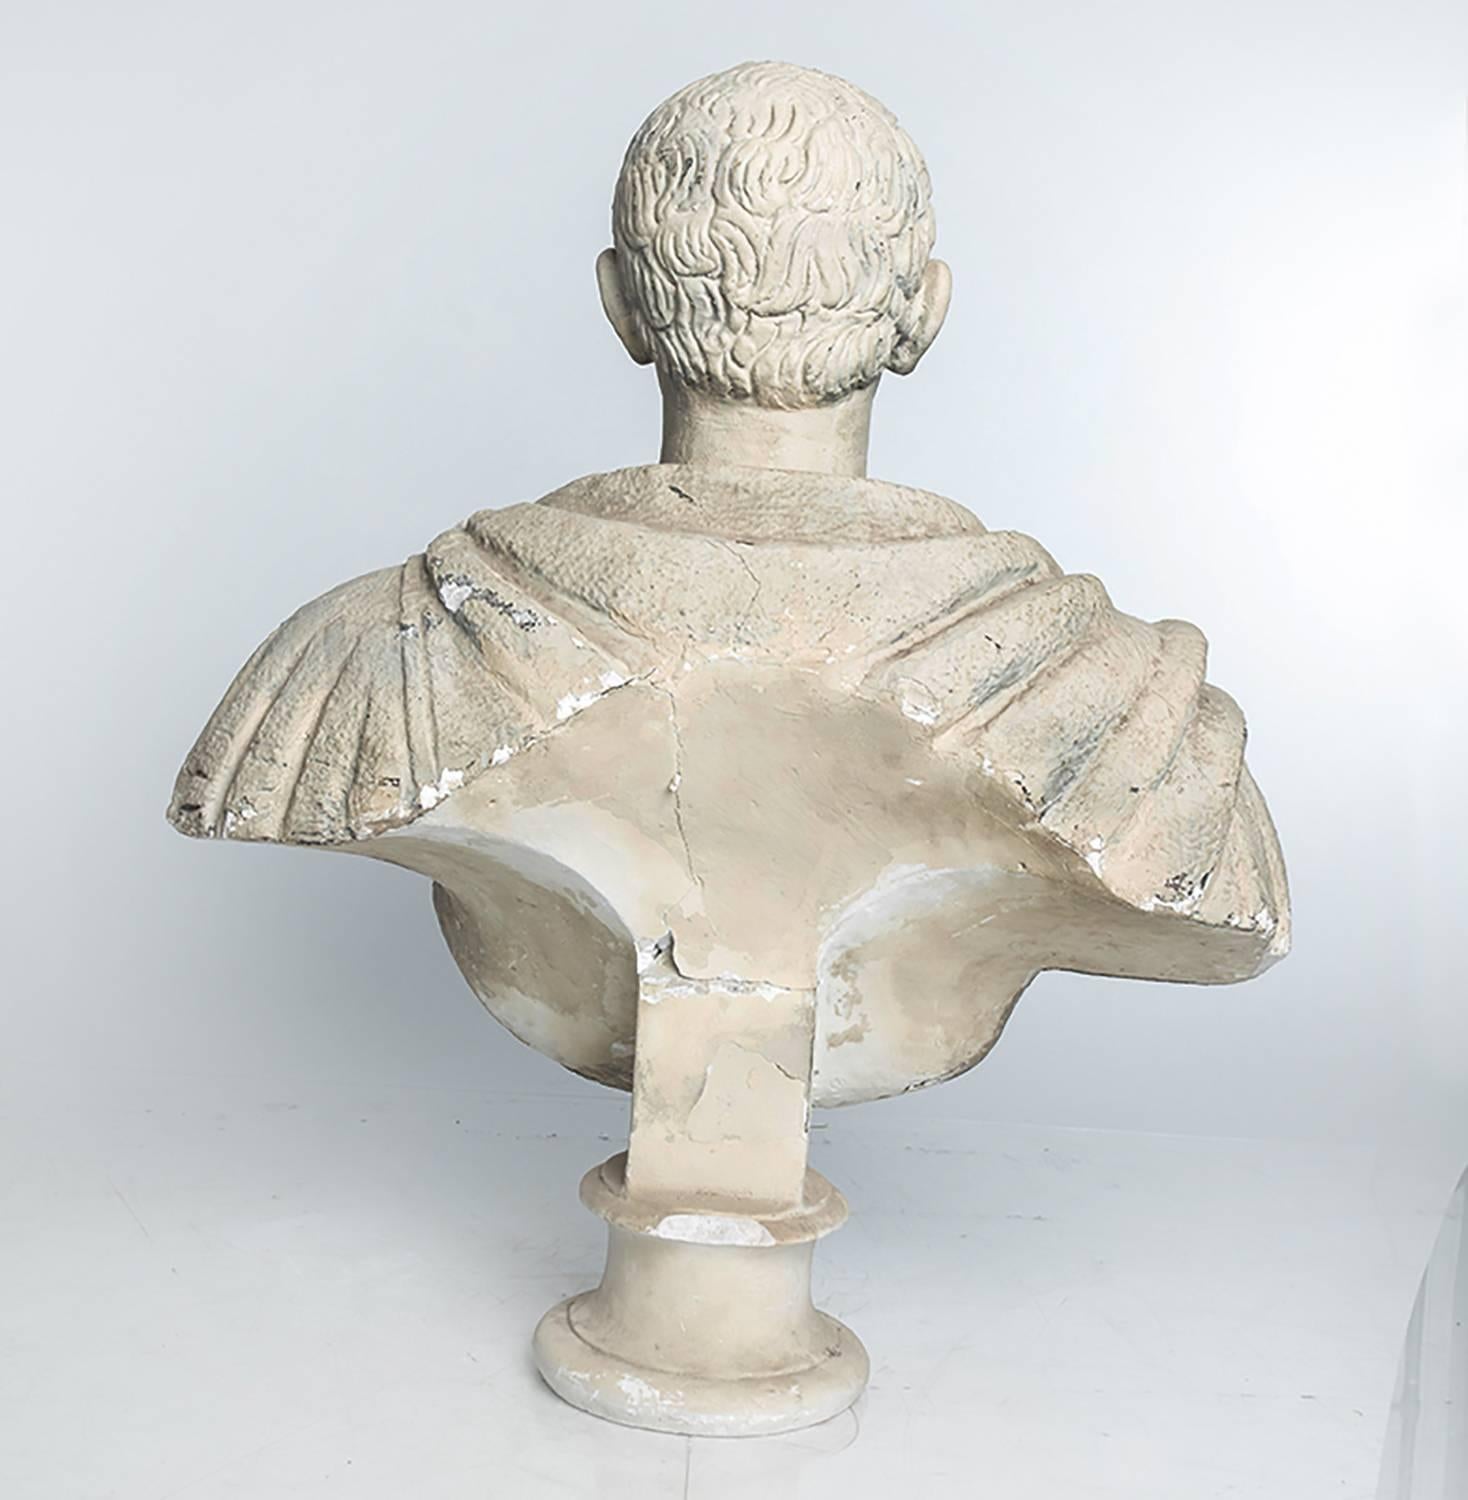 Plaster portrait bust of what appears to be a neoclassical military leader. Believed to have been used for theatrical display.